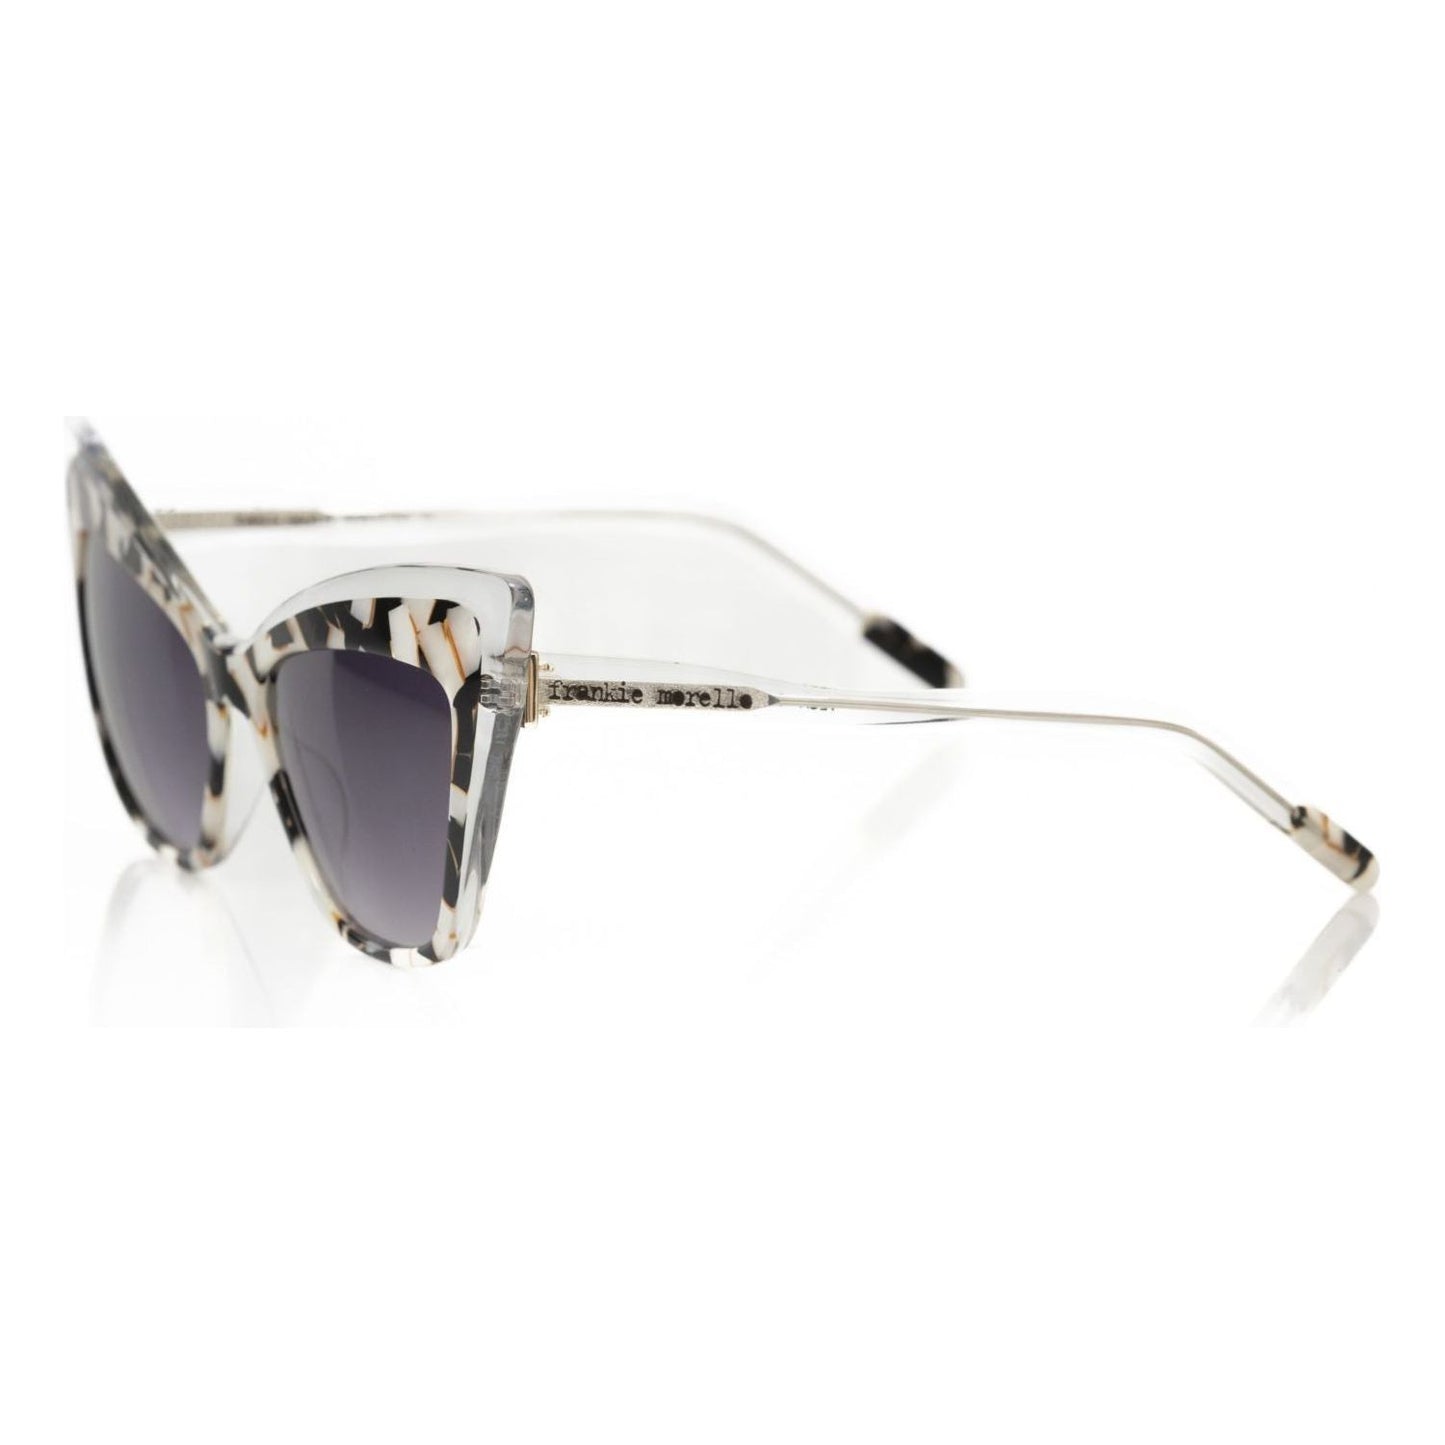 Frankie MorelloChic Cat Eye Sunglasses with Pearly AccentMcRichard Designer Brands£79.00